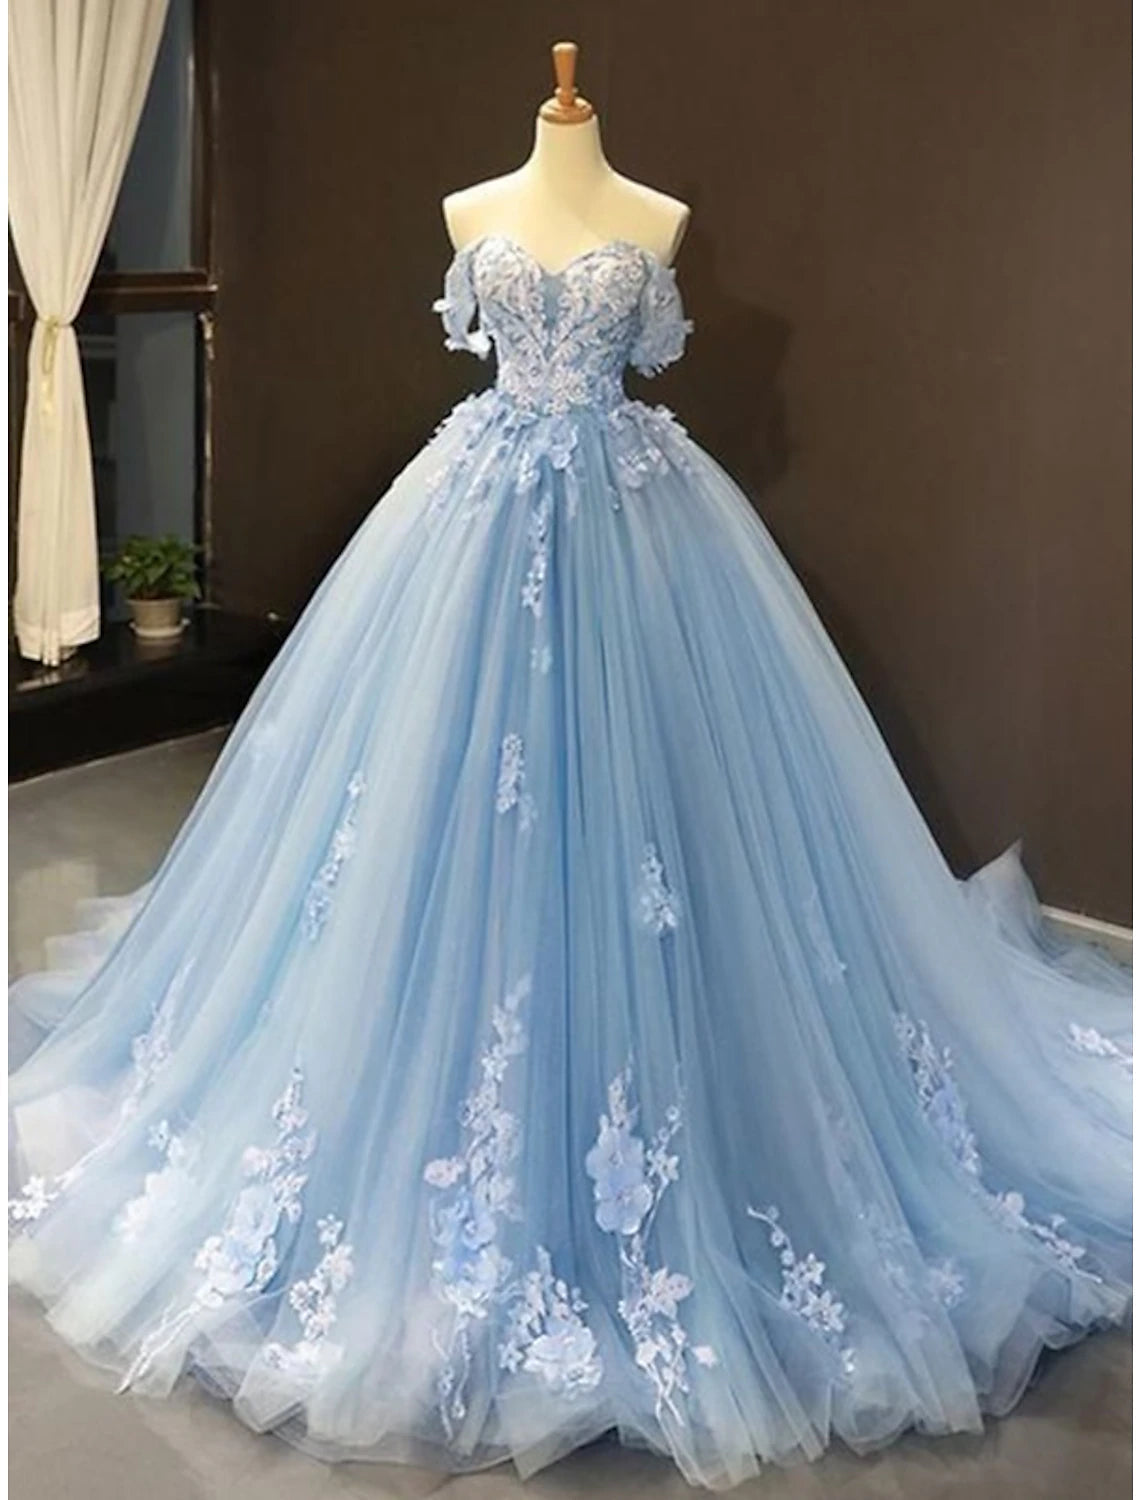 Ball Gown Prom Dresses Floral Wedding Dress Court Train Short Sleeve Sweetheart Lace with Pleats